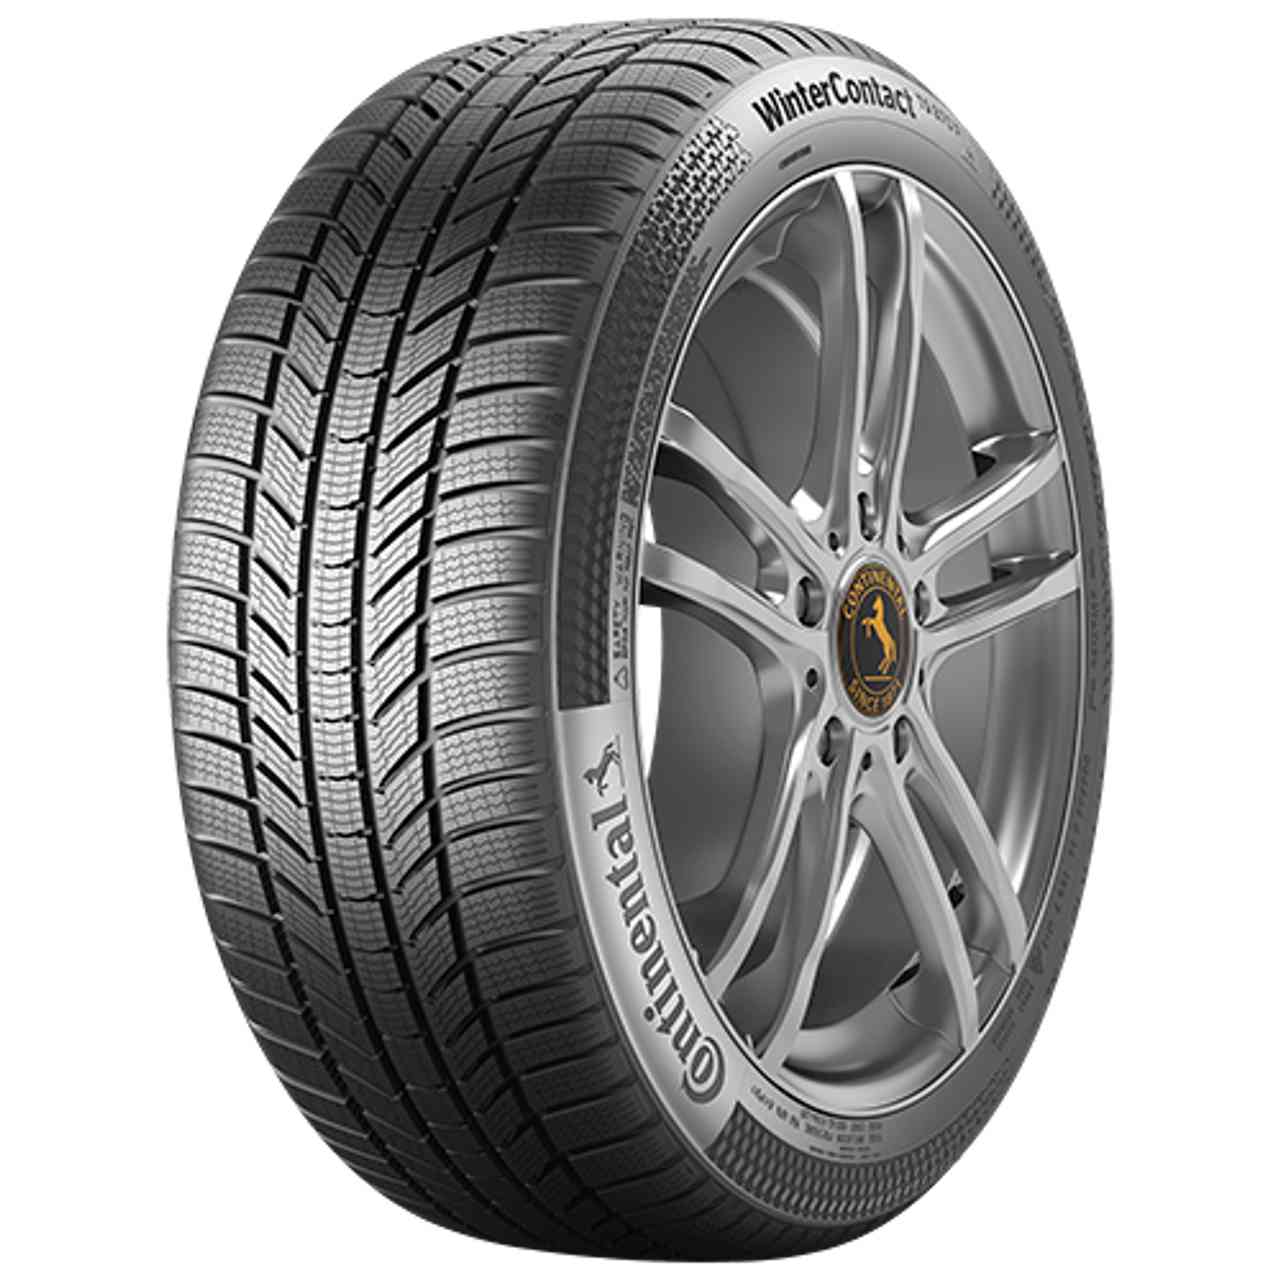 CONTINENTAL WINTERCONTACT TS 870 P (EVc) 235/55R17 103V BSW XL